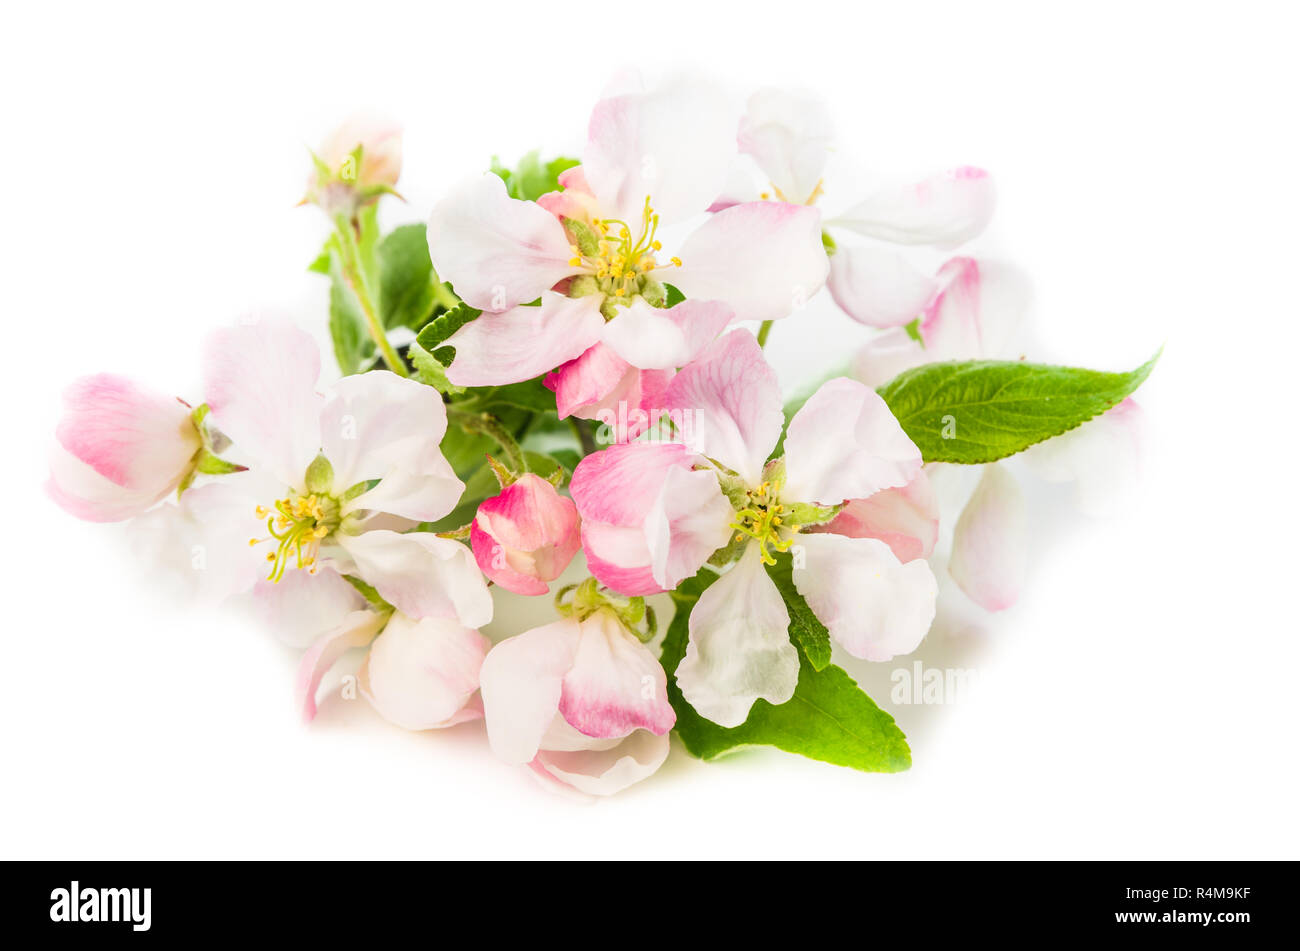 Branch of a blossoming apple-tree on a white background, close-up Stock Photo